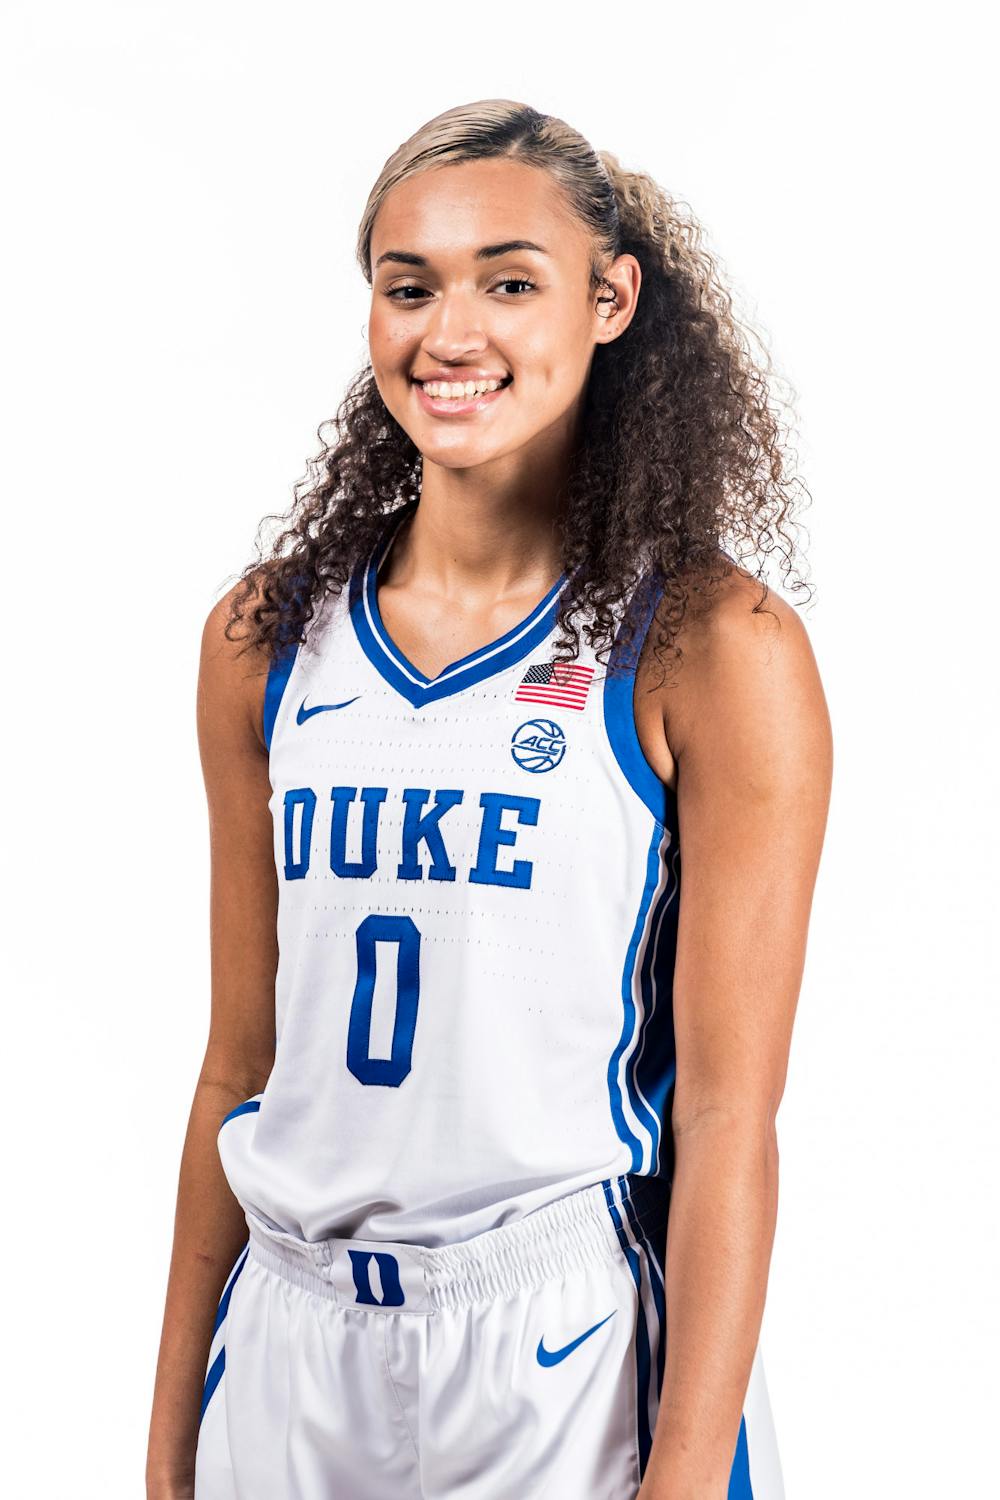 Celeste Taylor is expected to enter the WNBA draft after this season.